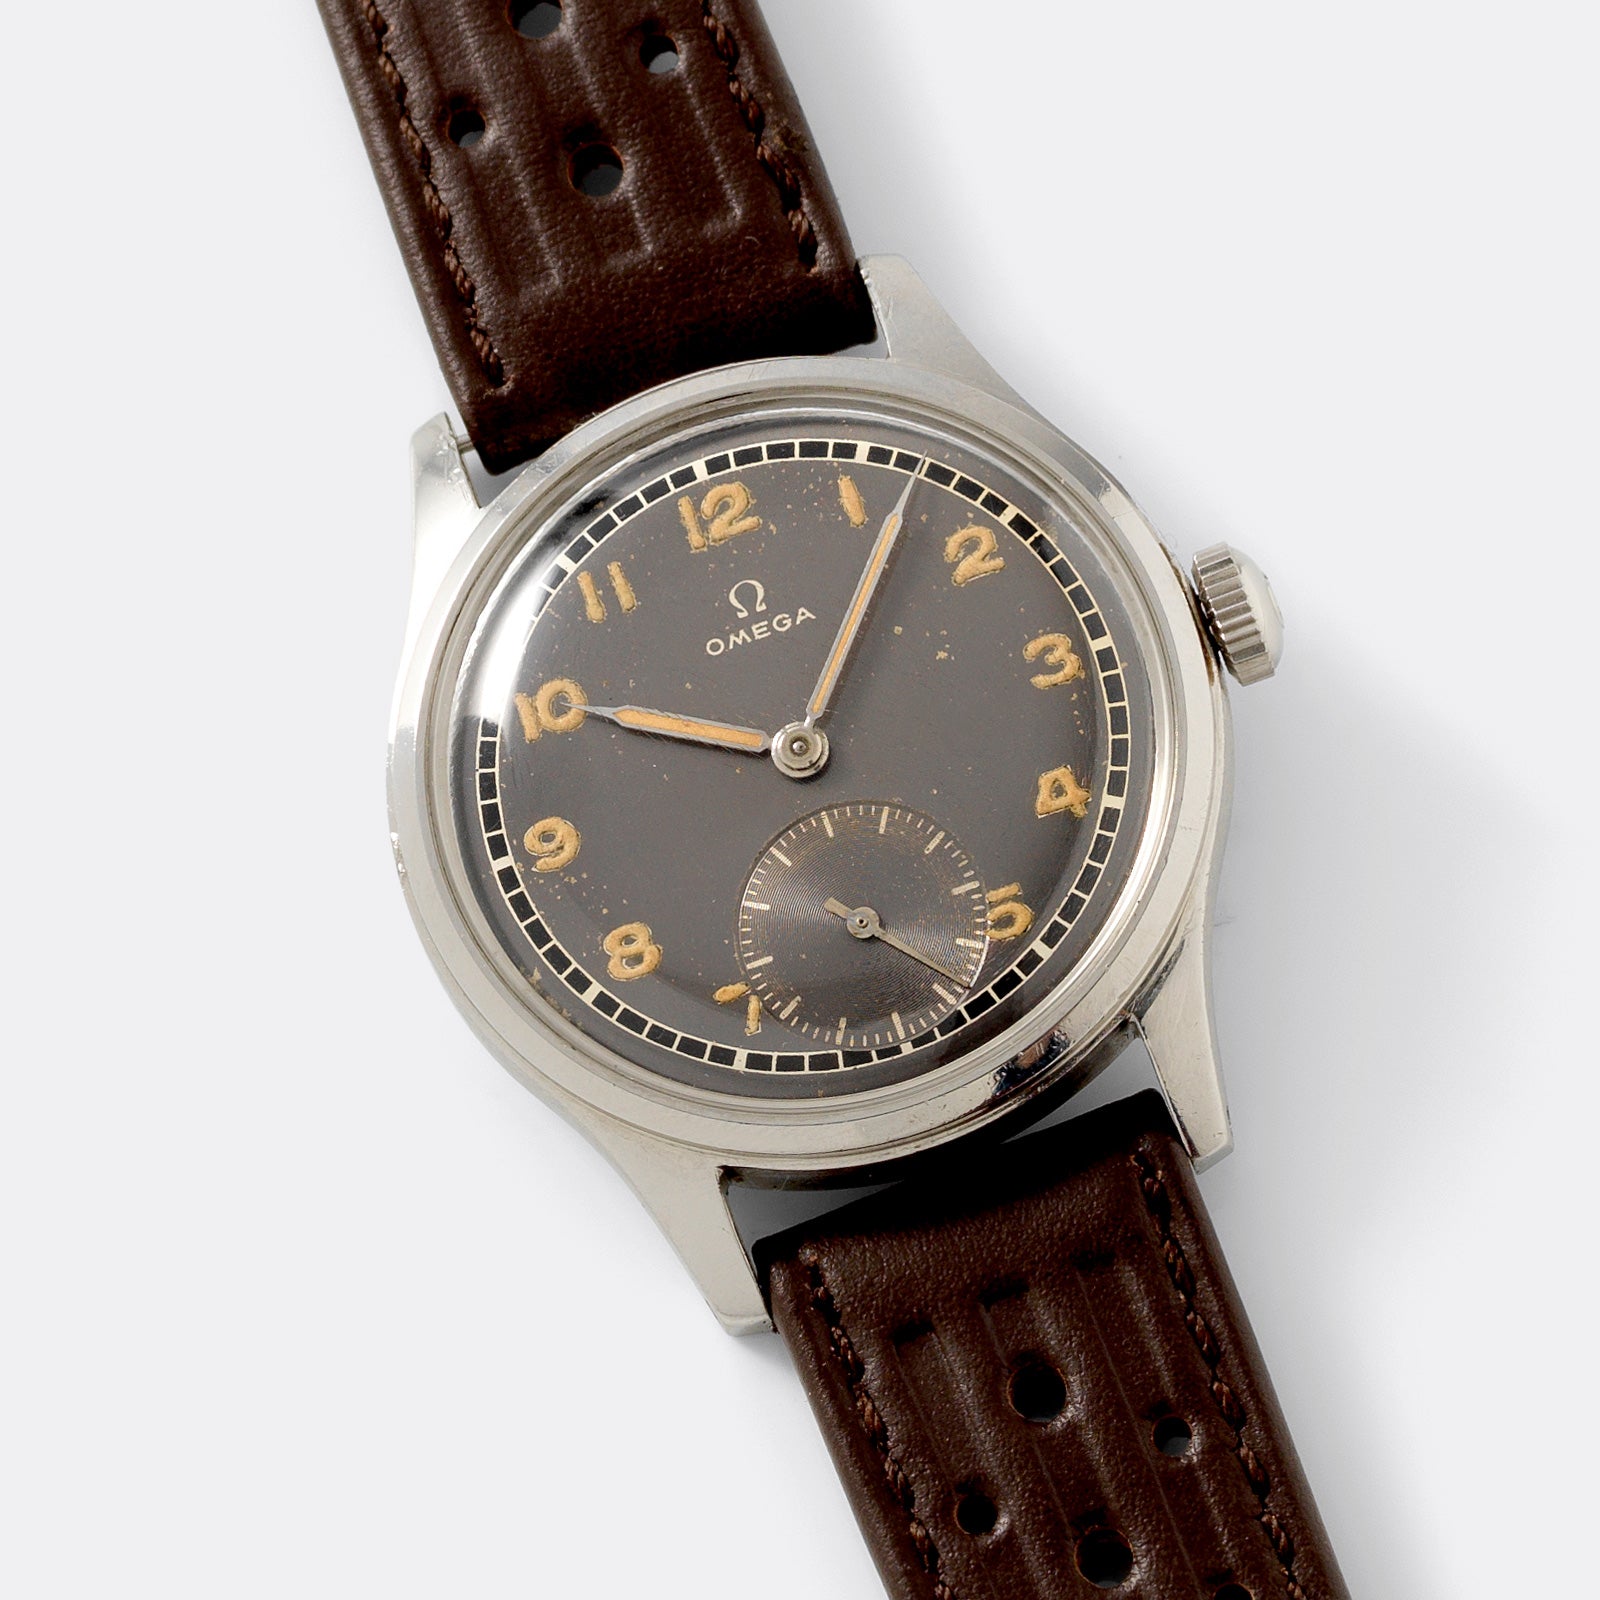 Omega Suveran Reference 2400-1 Dress Watch 1940s